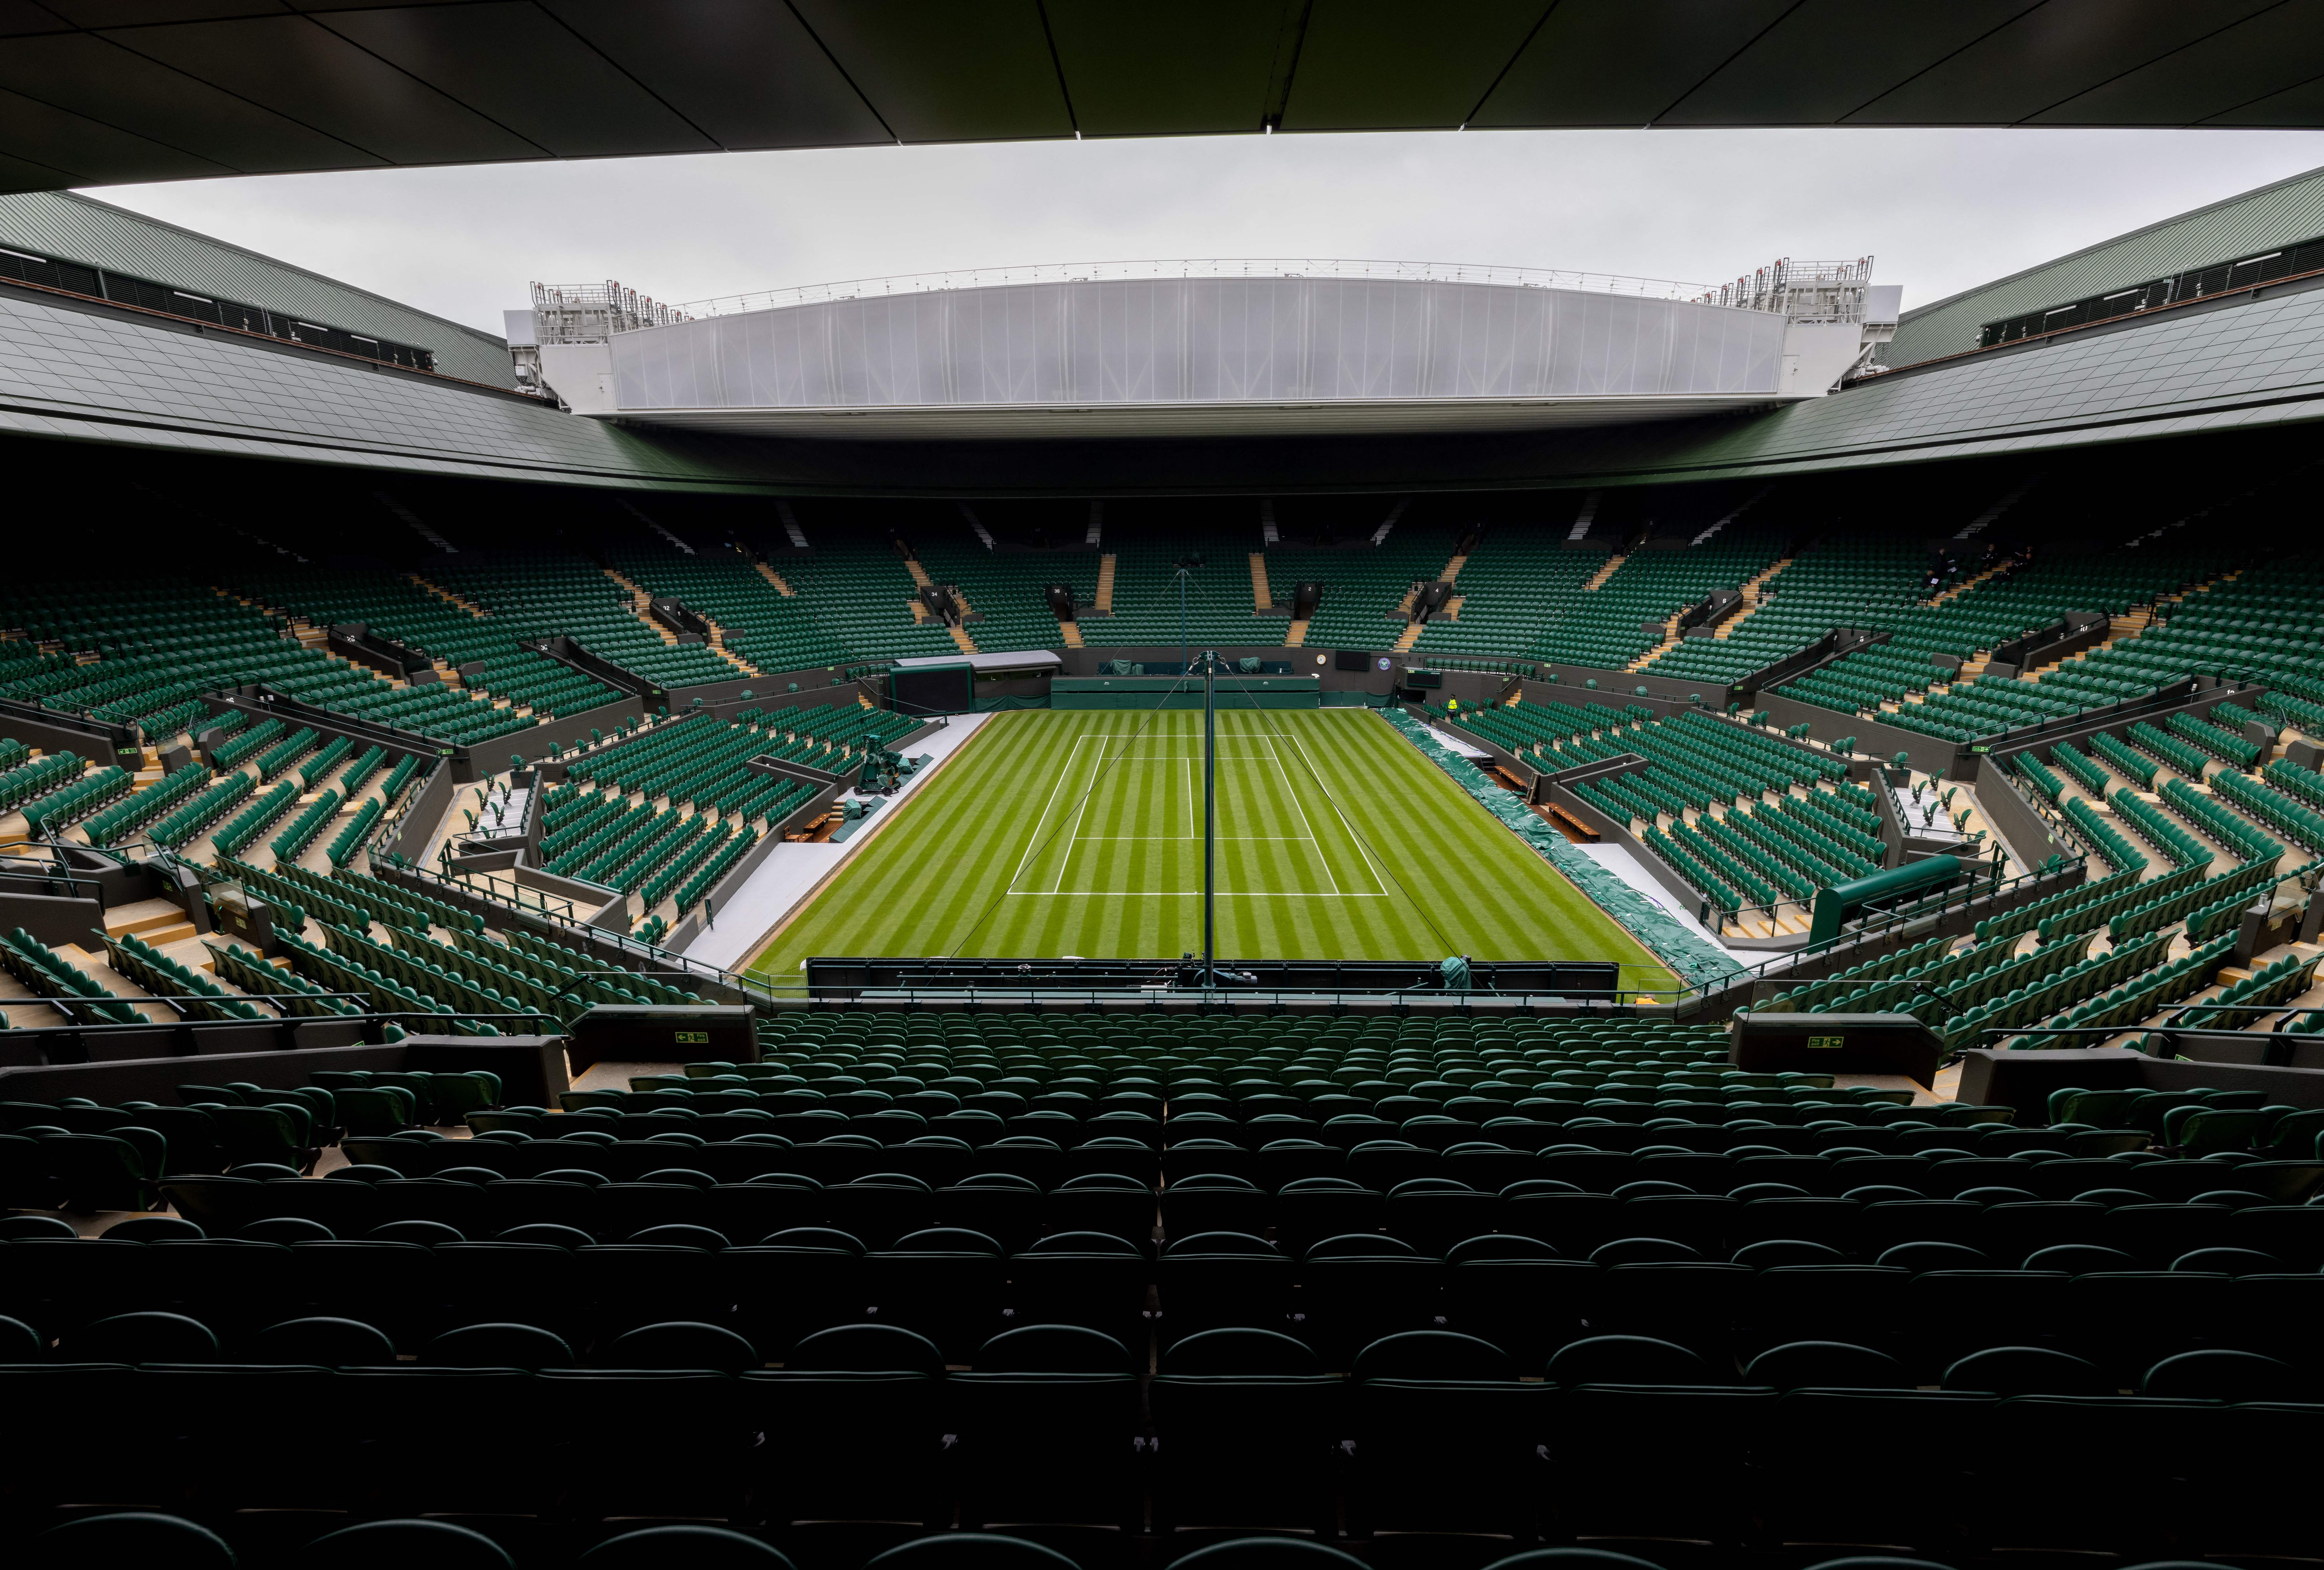 How to Watch Wimbledon 2021 Without Cable